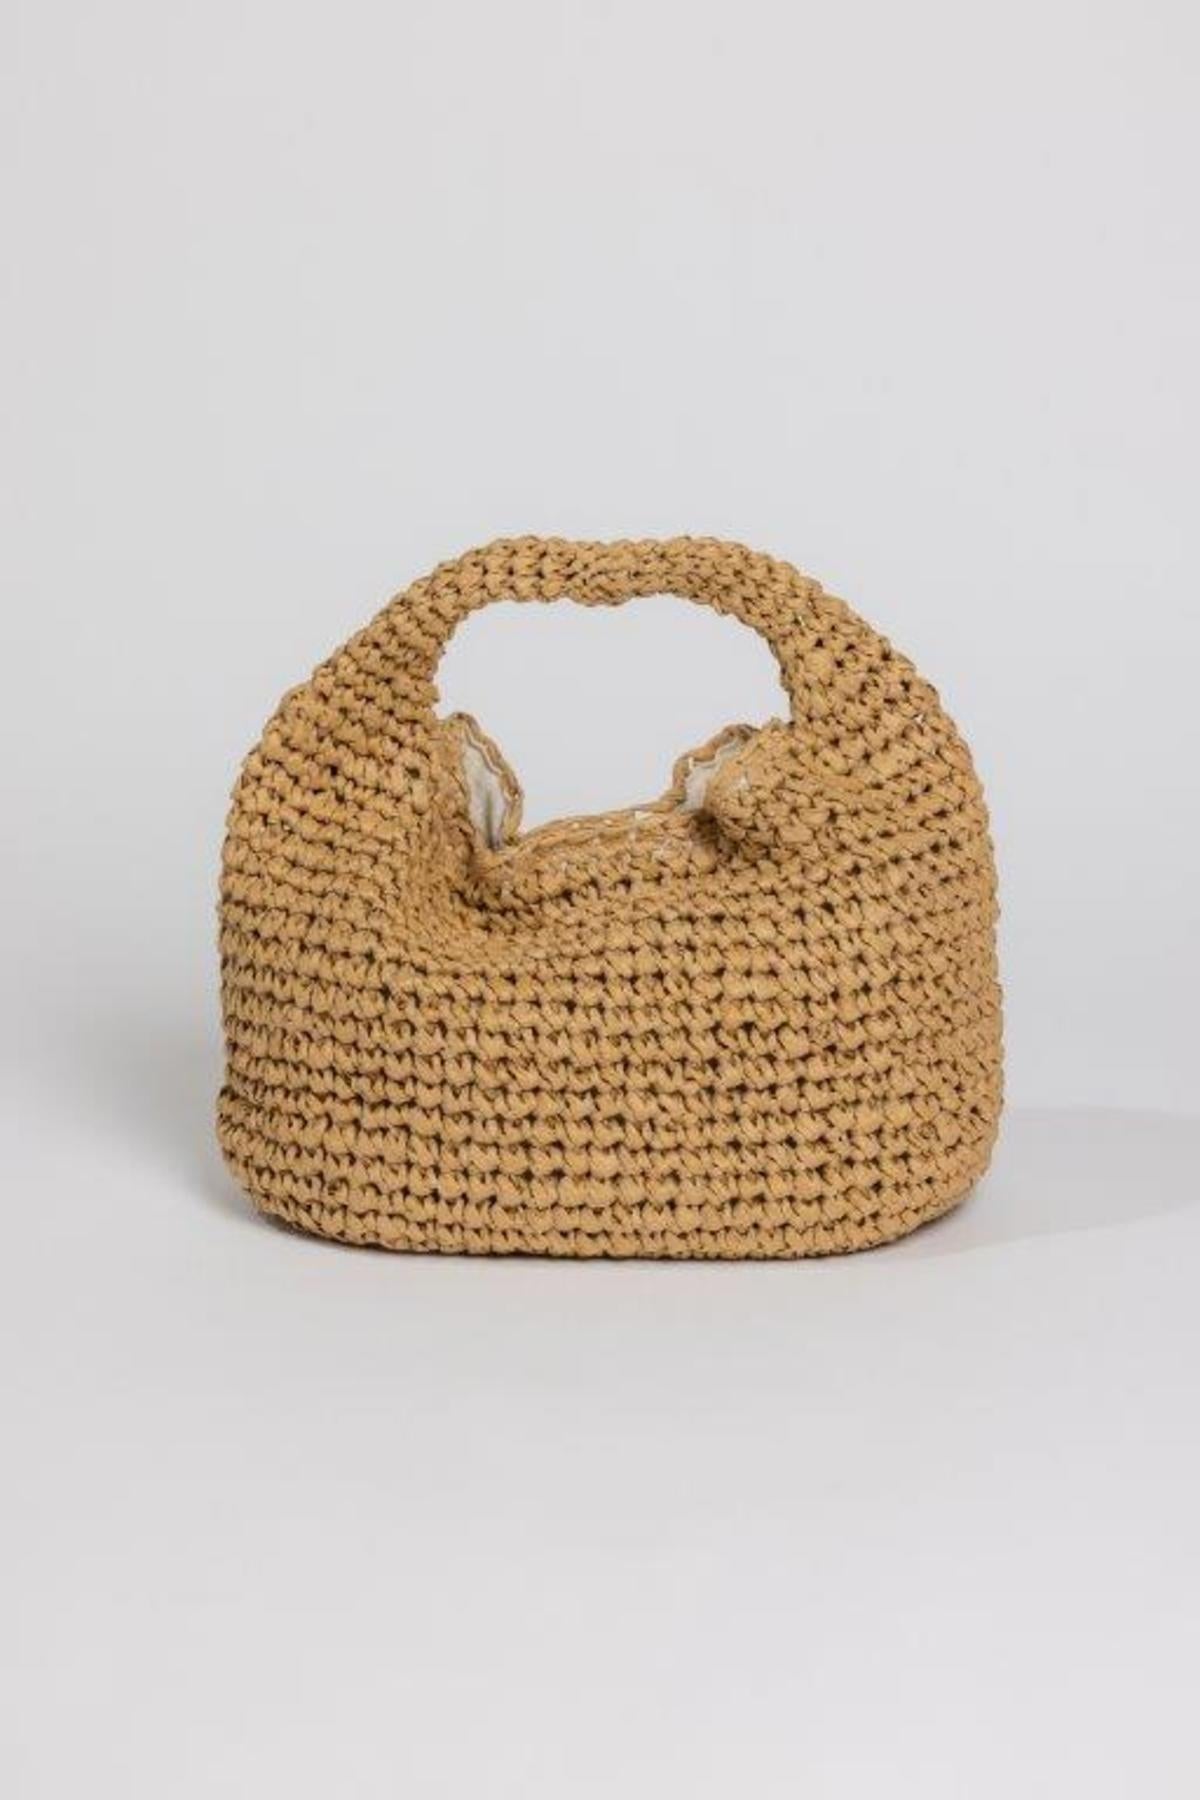 A small, hand-woven paper straw Slouch Bag by Velvet by Graham & Spencer with a rounded shape and integrated handle, displayed against a plain, light background.-36289702494401